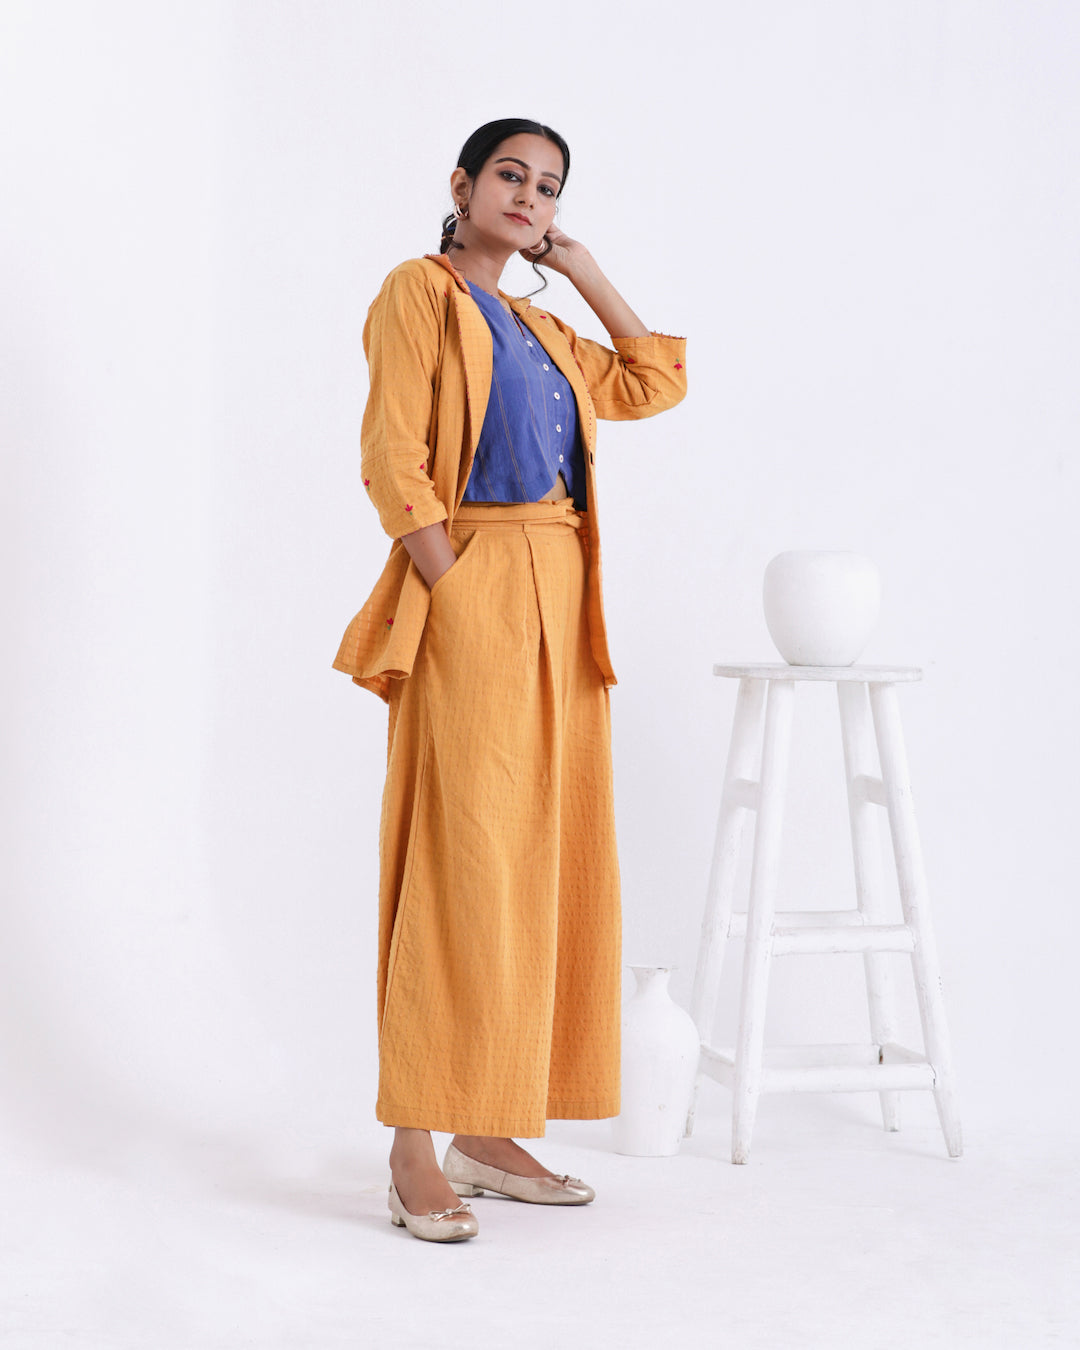 Shop business suit for women from Bebaak: 3 pc set of jacket, top and palazzo